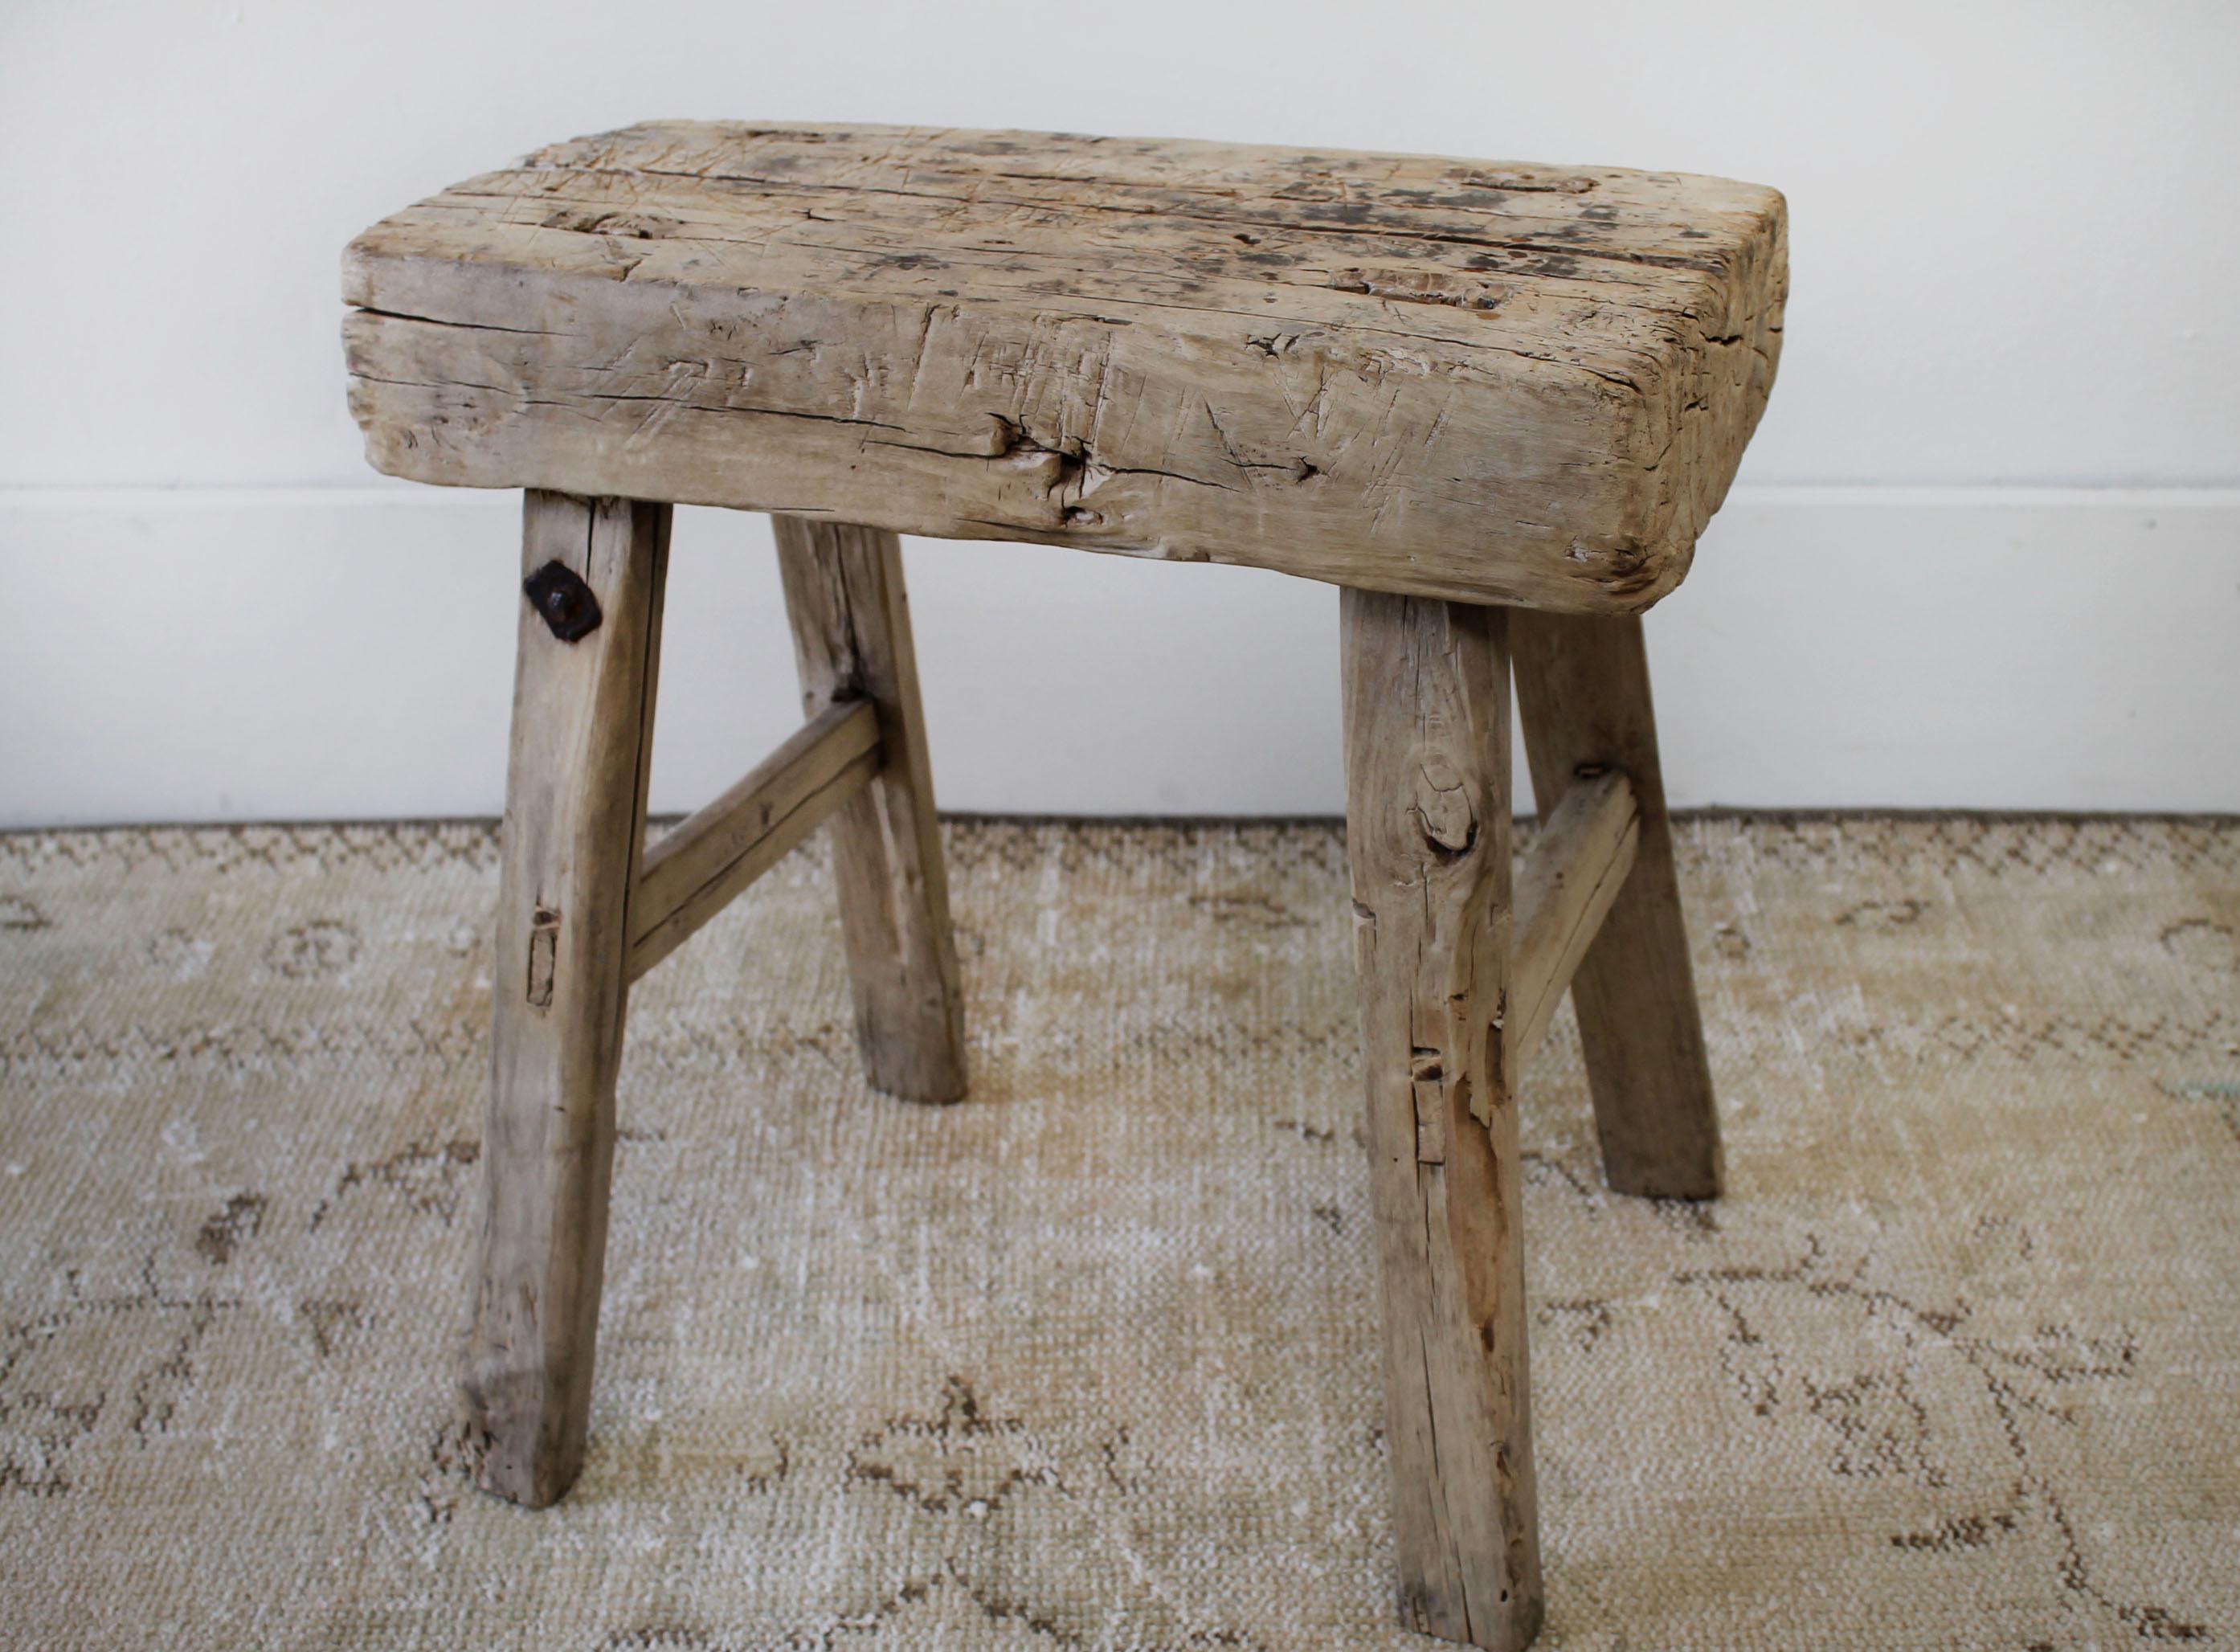 Antique wooden stool. Original, very solid and sturdy, great for a side table, or next to a tub as decoration.
Measures: 18